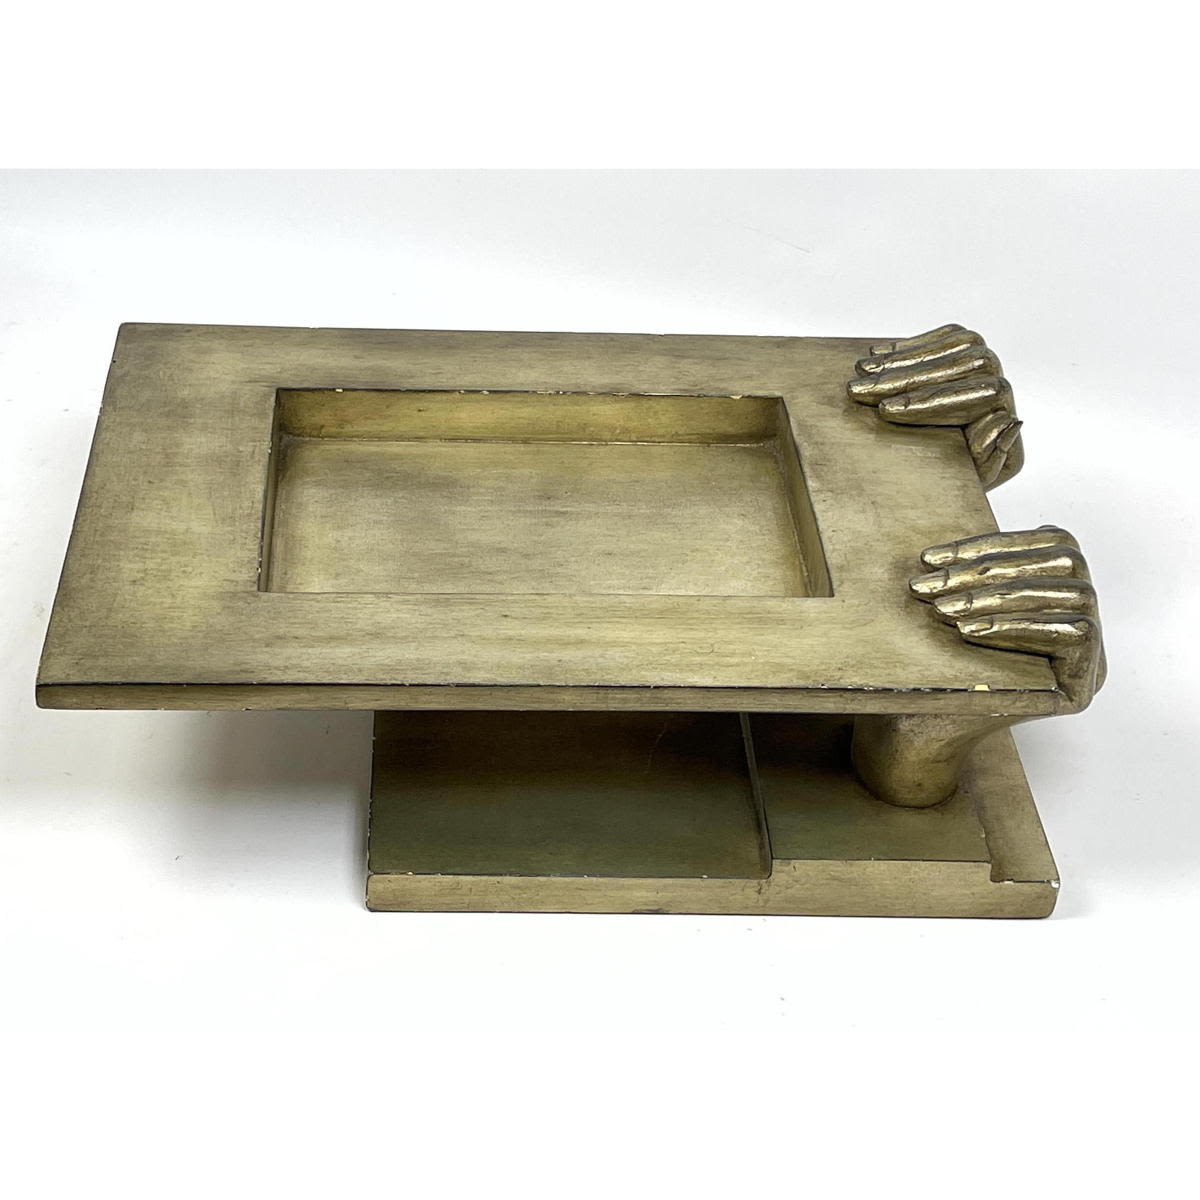 Decorative hands form serving tray 

Dimensions: